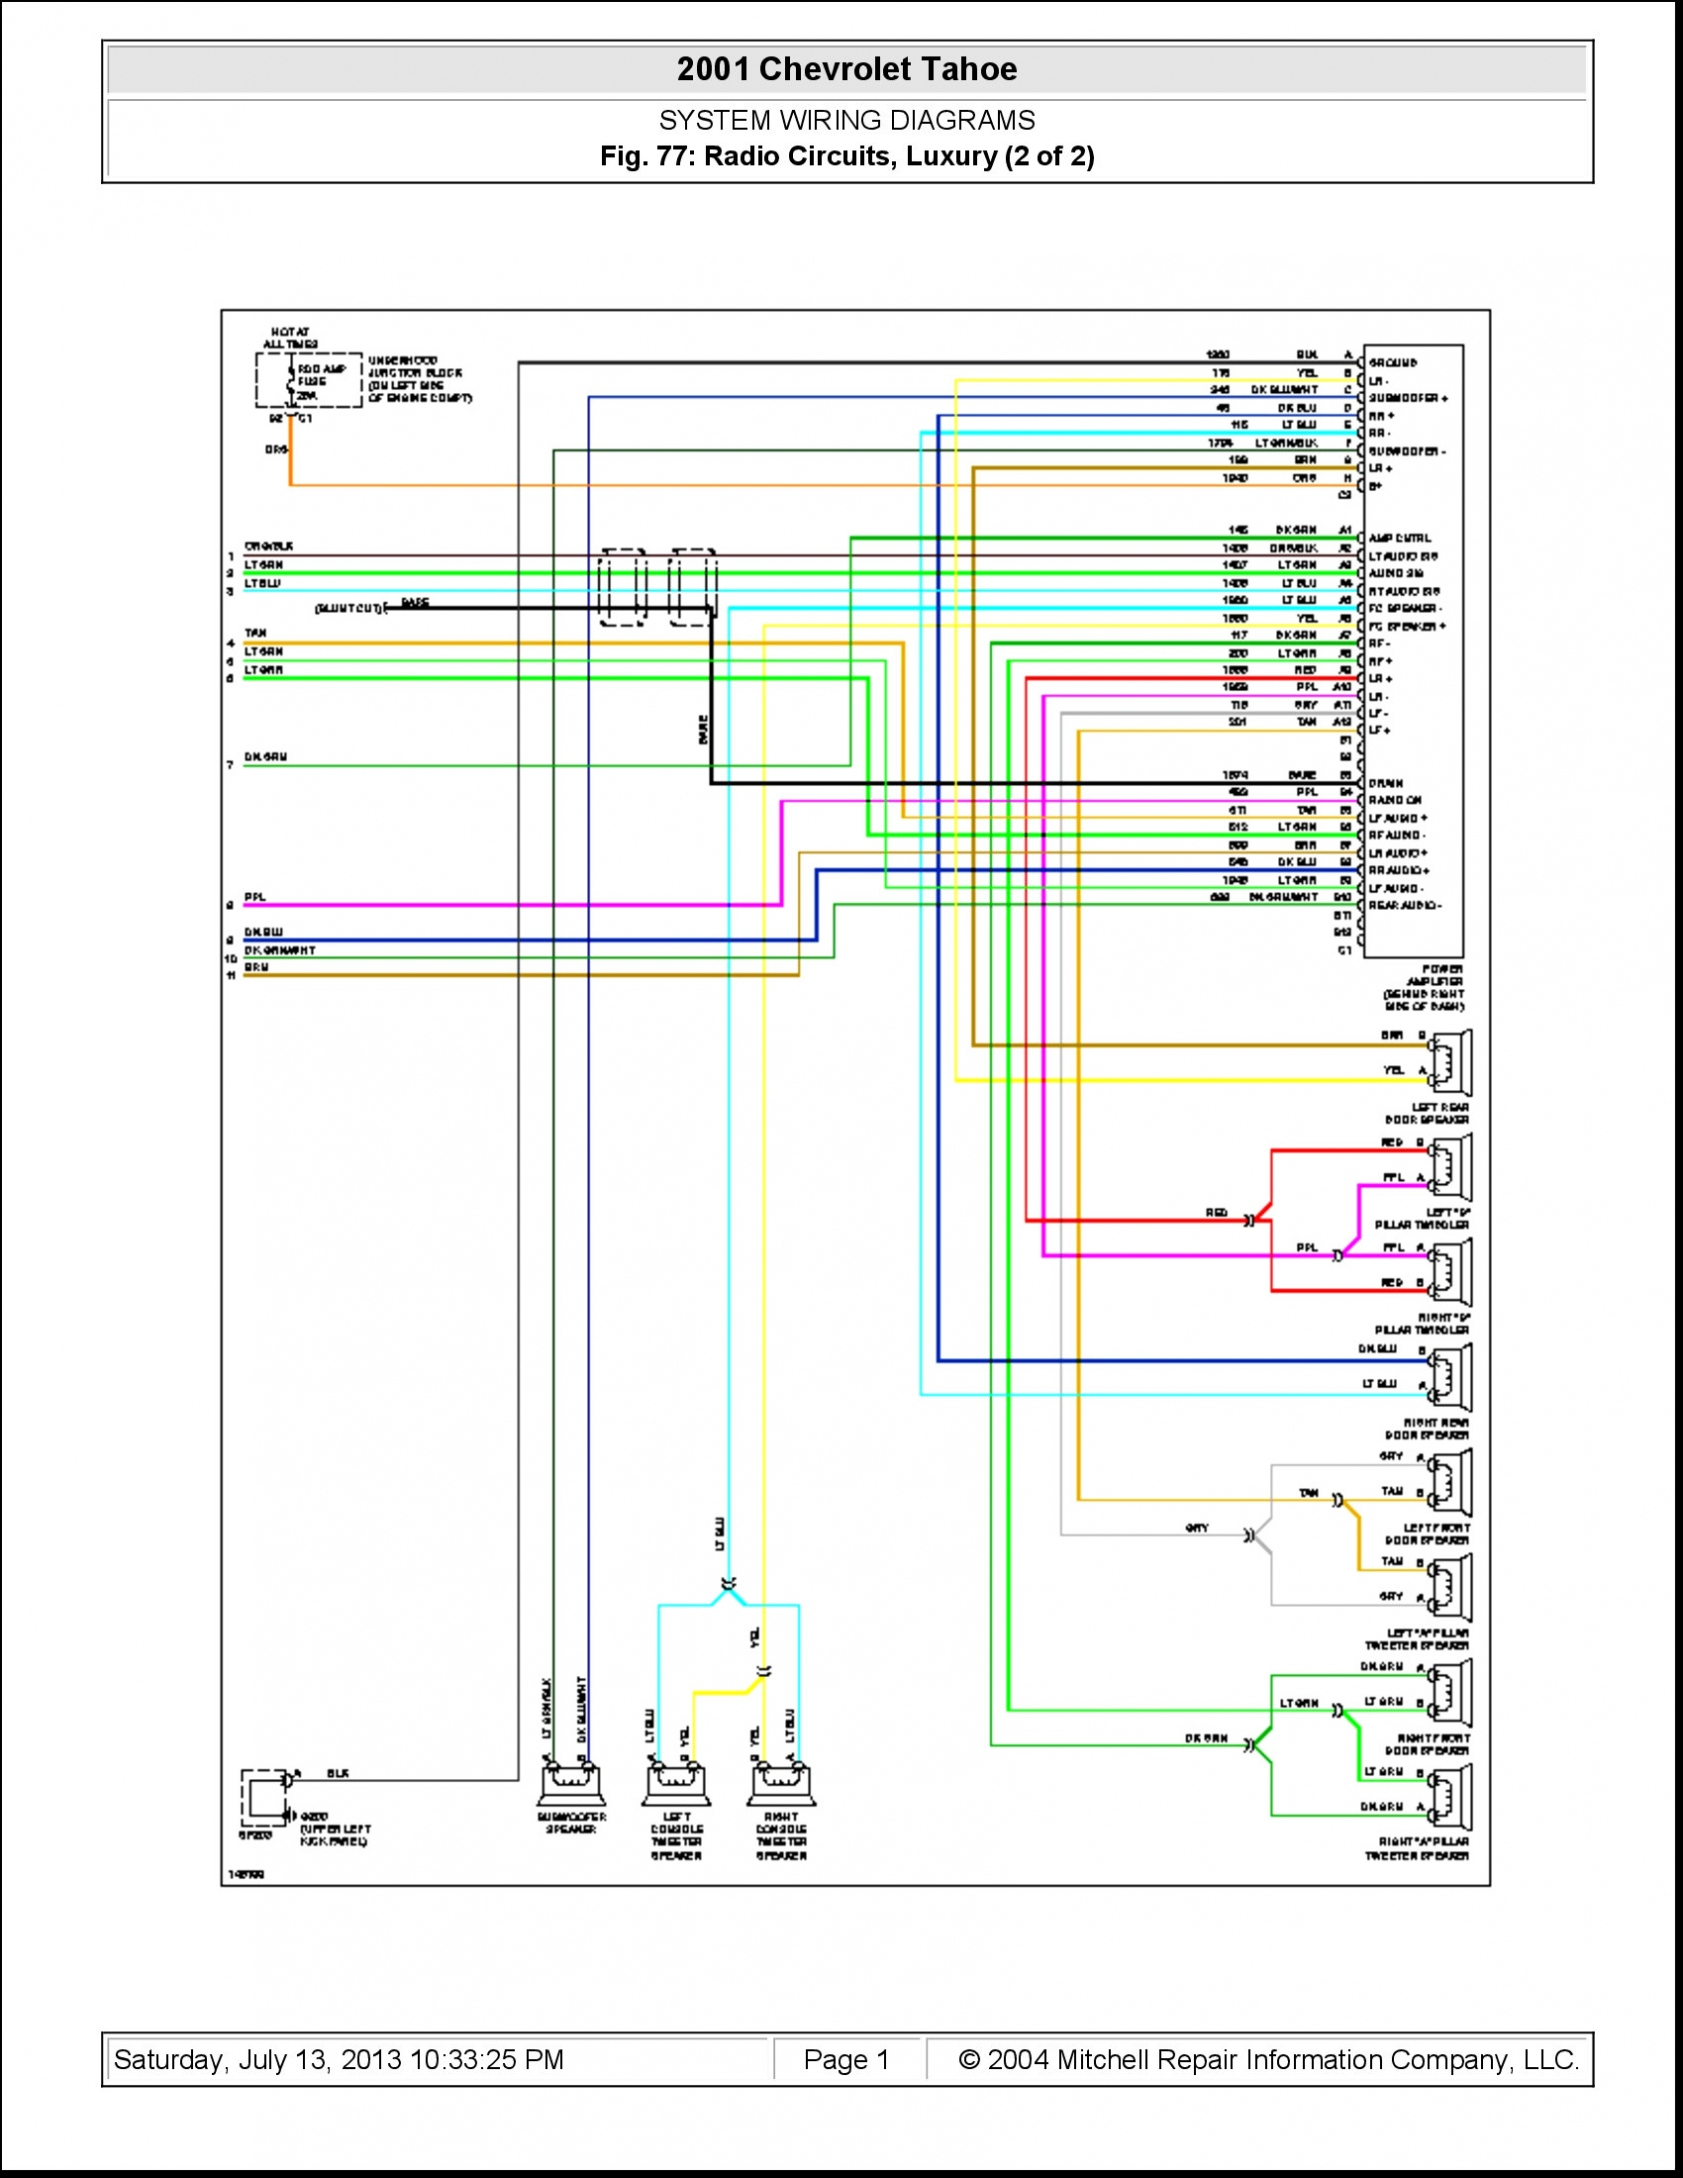 2010 Ford F150 Wiring Diagram Awesome Best Ford F150 Radio Wiring - Ford F150 Radio Wiring Harness Diagram